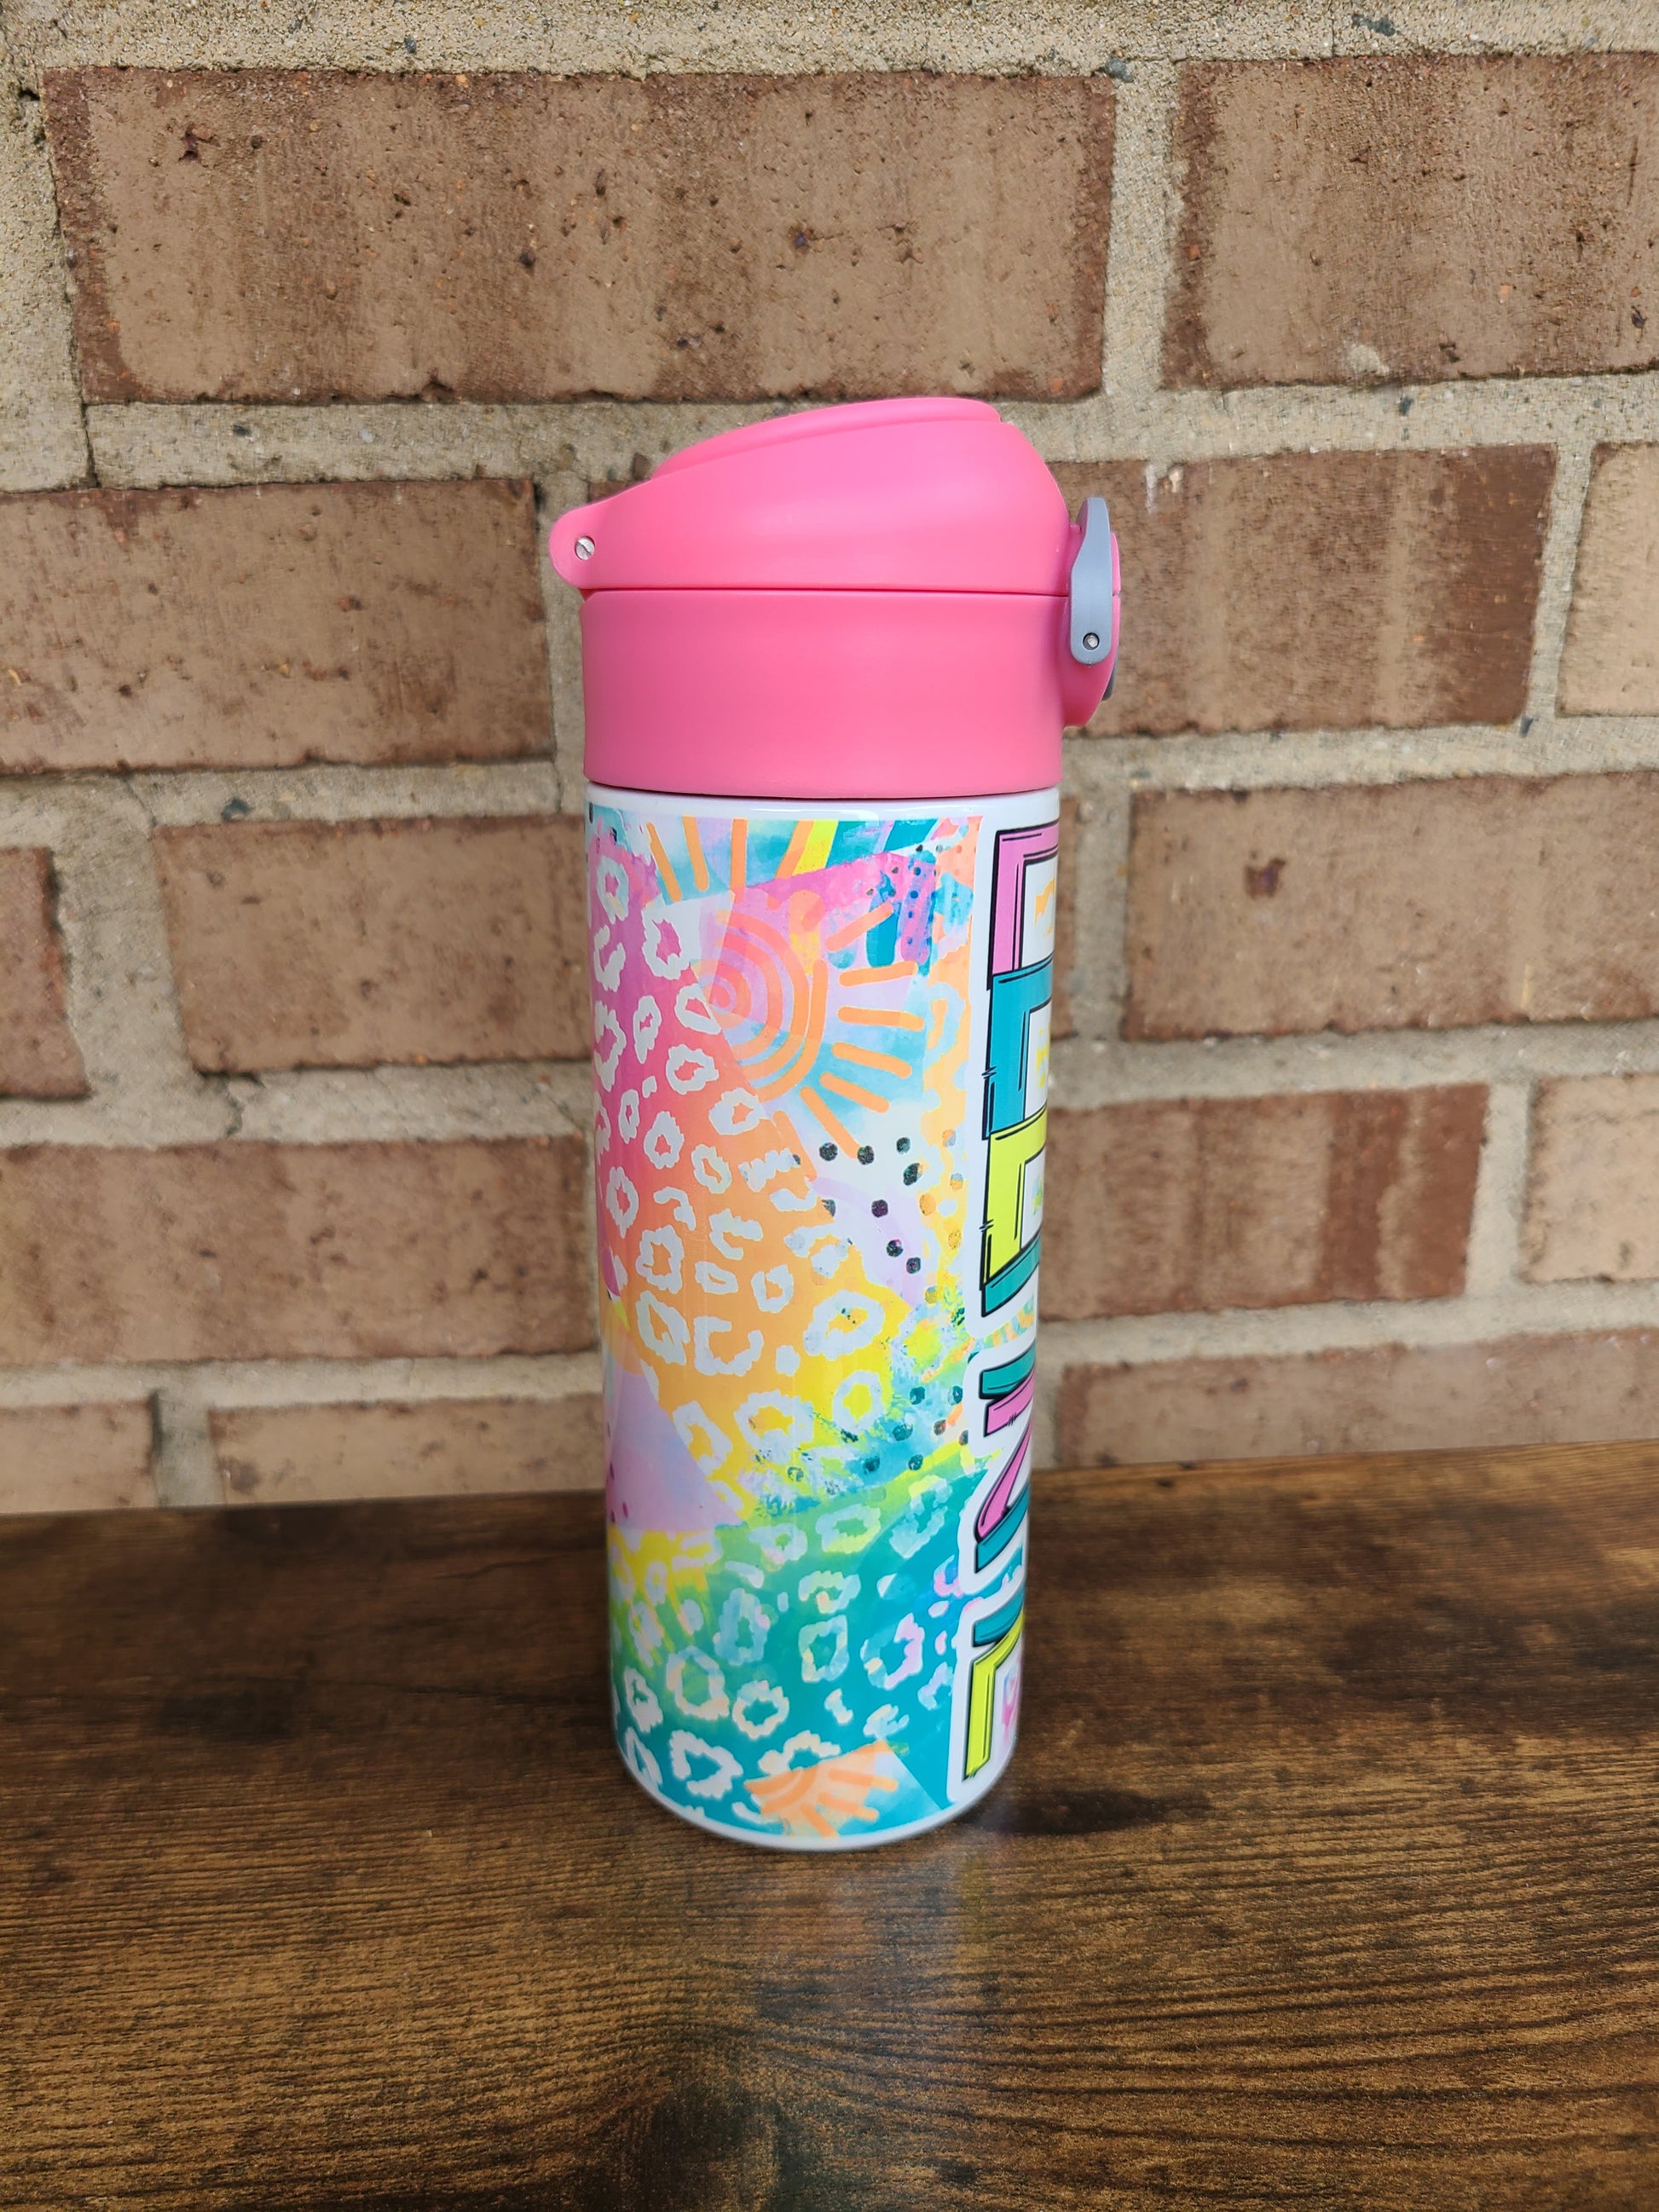 12oz water bottle with pink lid that has a built in straw, locking push button and handle. This design features bright colored animal print with sunshine and rainbows. Personalized in coordinating bright colors with a pink lid. Back to school.